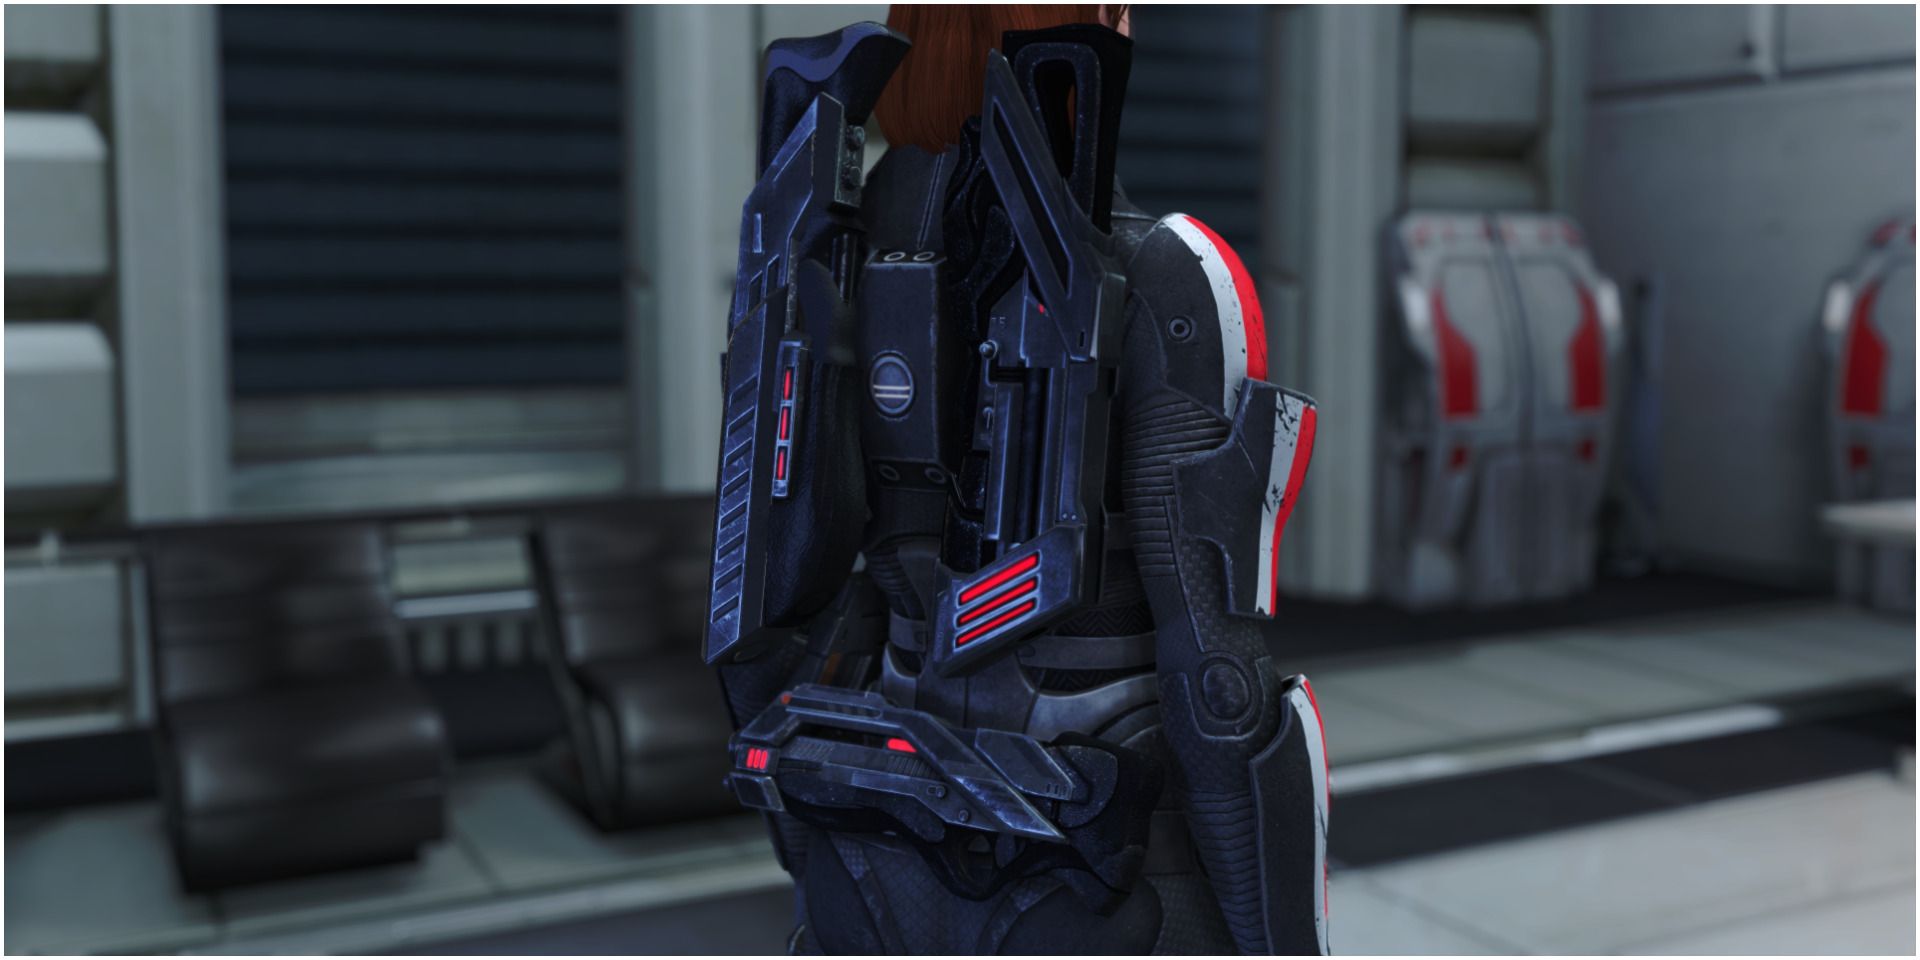 Commander Shepard With Master Spectre Gear From Mass Effect Legendary Edition